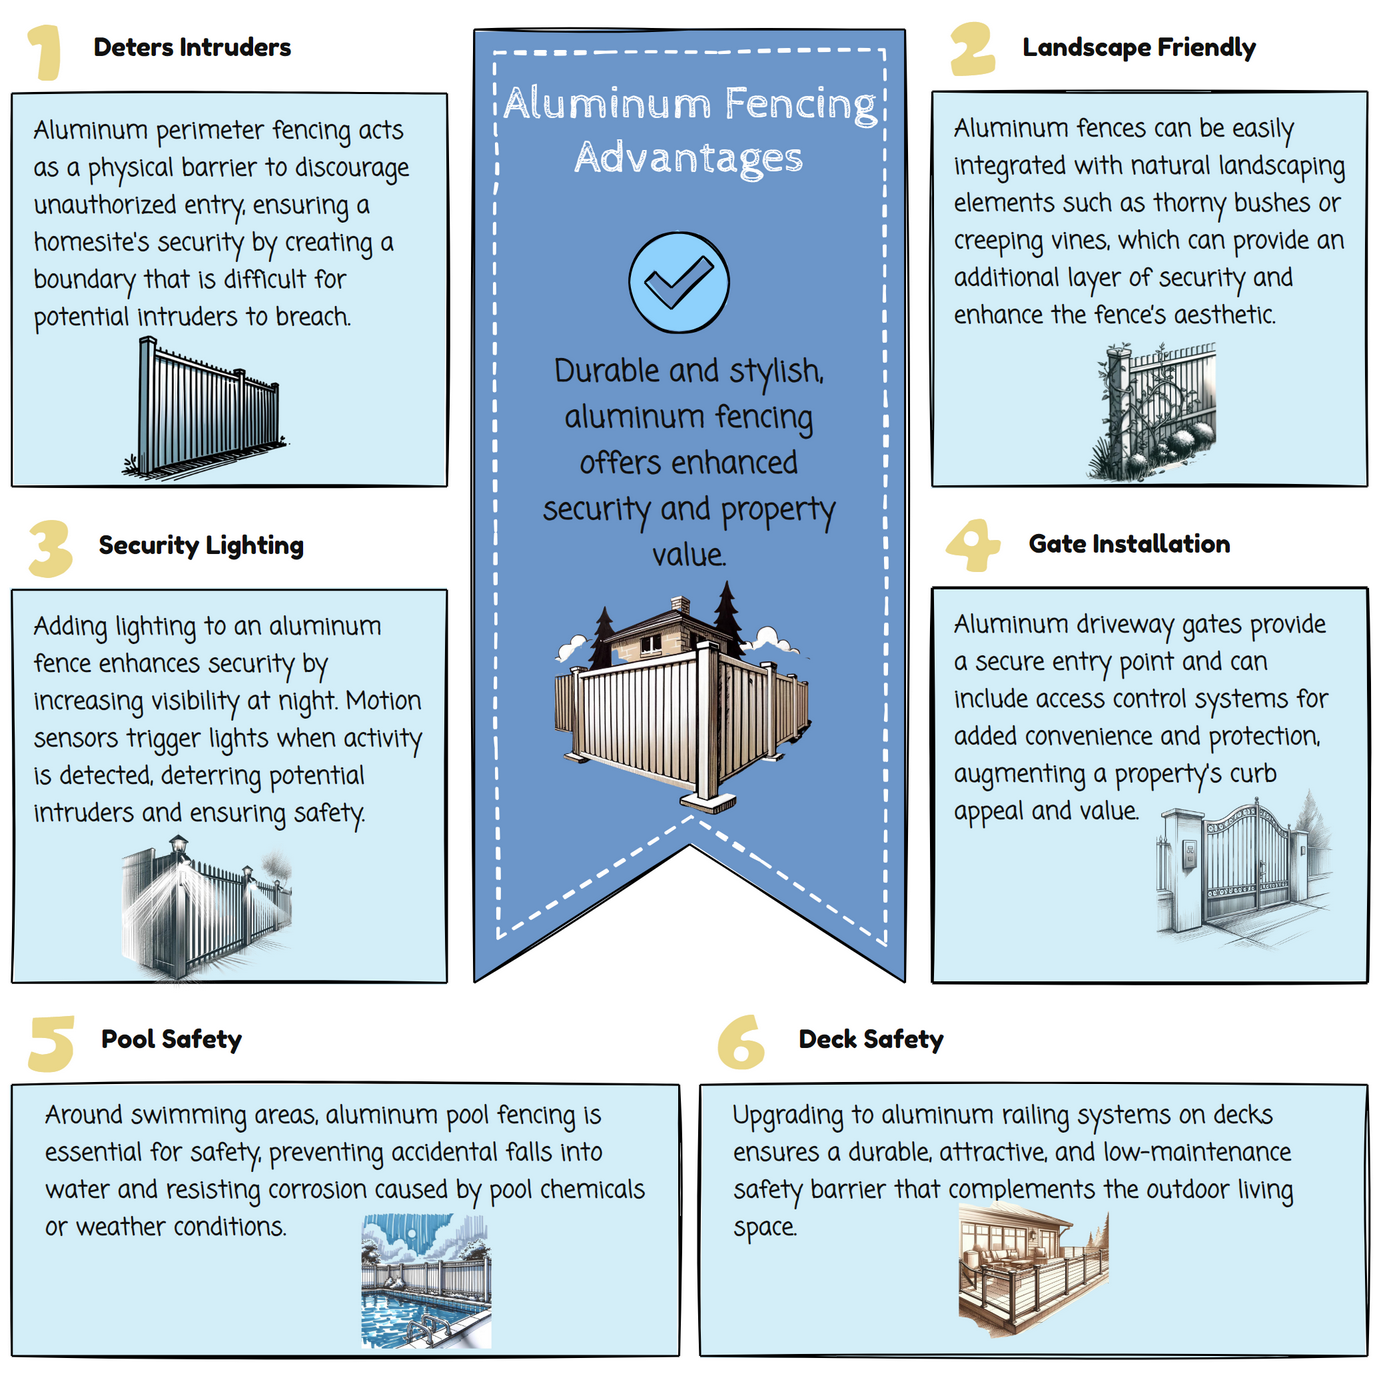 5 Ways to Boost Security With Aluminum Fencing